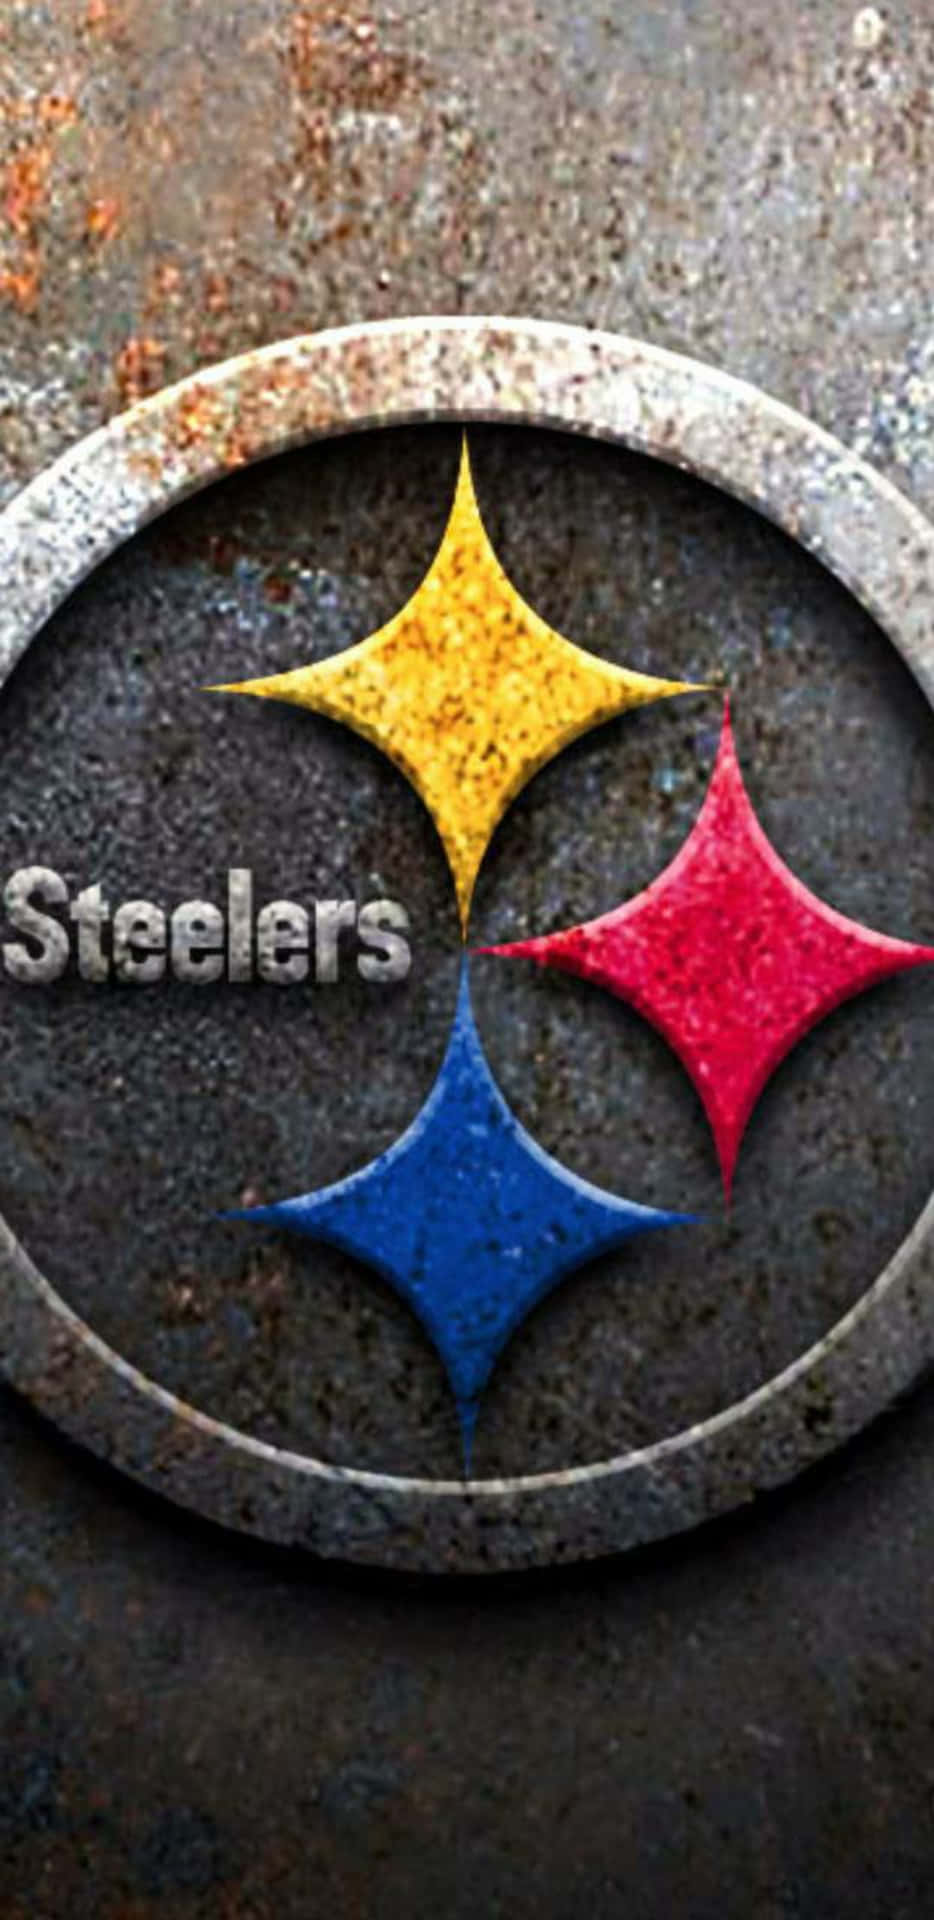 Show everyone who you support with this Steelers Phone Wallpaper